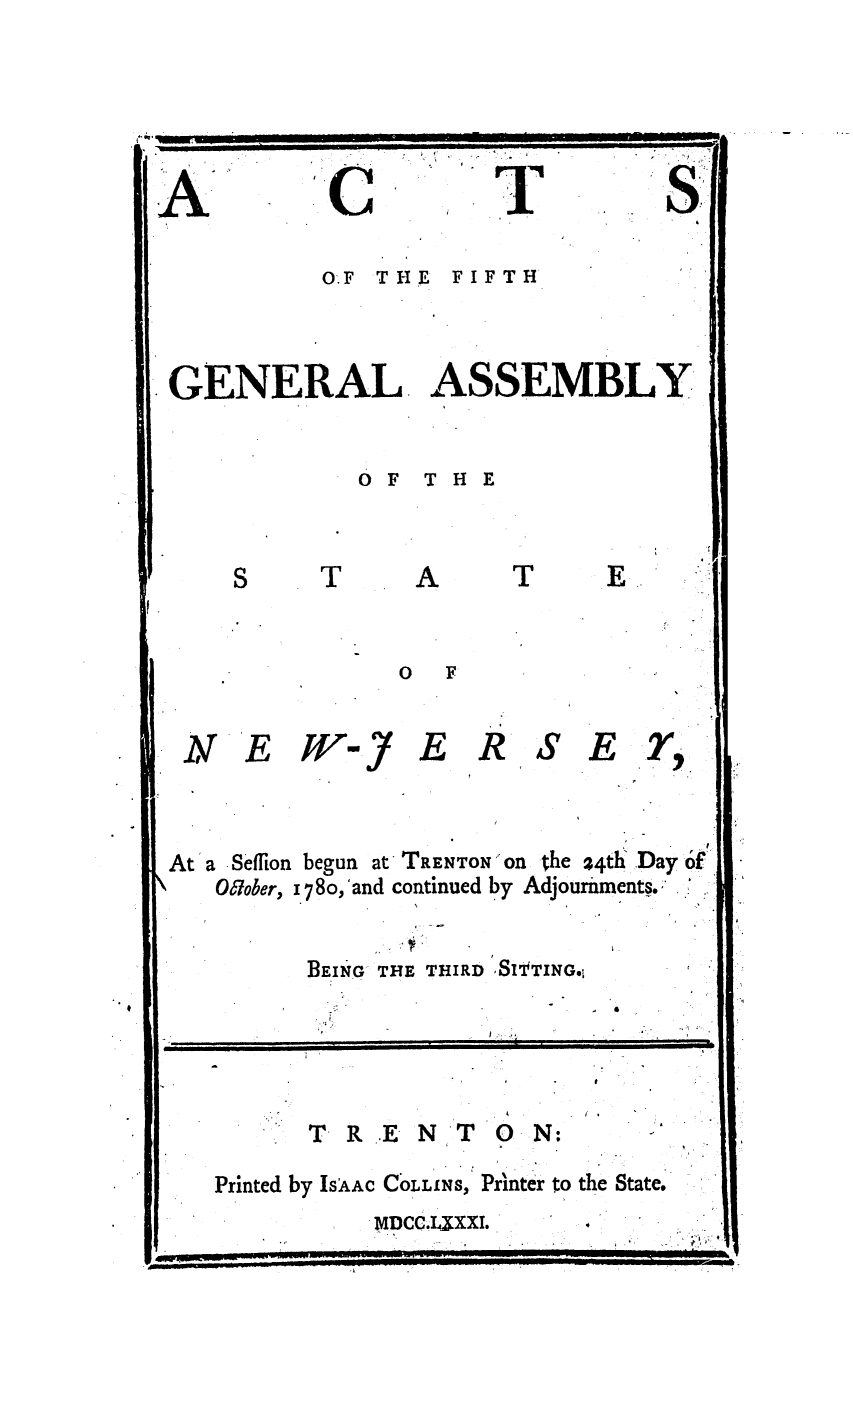 handle is hein.ssl/ssnj0233 and id is 1 raw text is: O.F THE FIFTH
GENERAL ASSEMBLY
OF THE
S    T     A     T
0 F
NE        -J ERSEY
At a Seffion begun at TRENTON Ofn the 24th: Day o'f
Olober, 1 78o,'and continued by Adjournments.
BEING THE THIRD SItTINGo!
I~    T R   N T   i         II
TR.EN TO0N:
Printed by IsAAC COLLINS, Printer to the State.
MDCCJ XXI..


